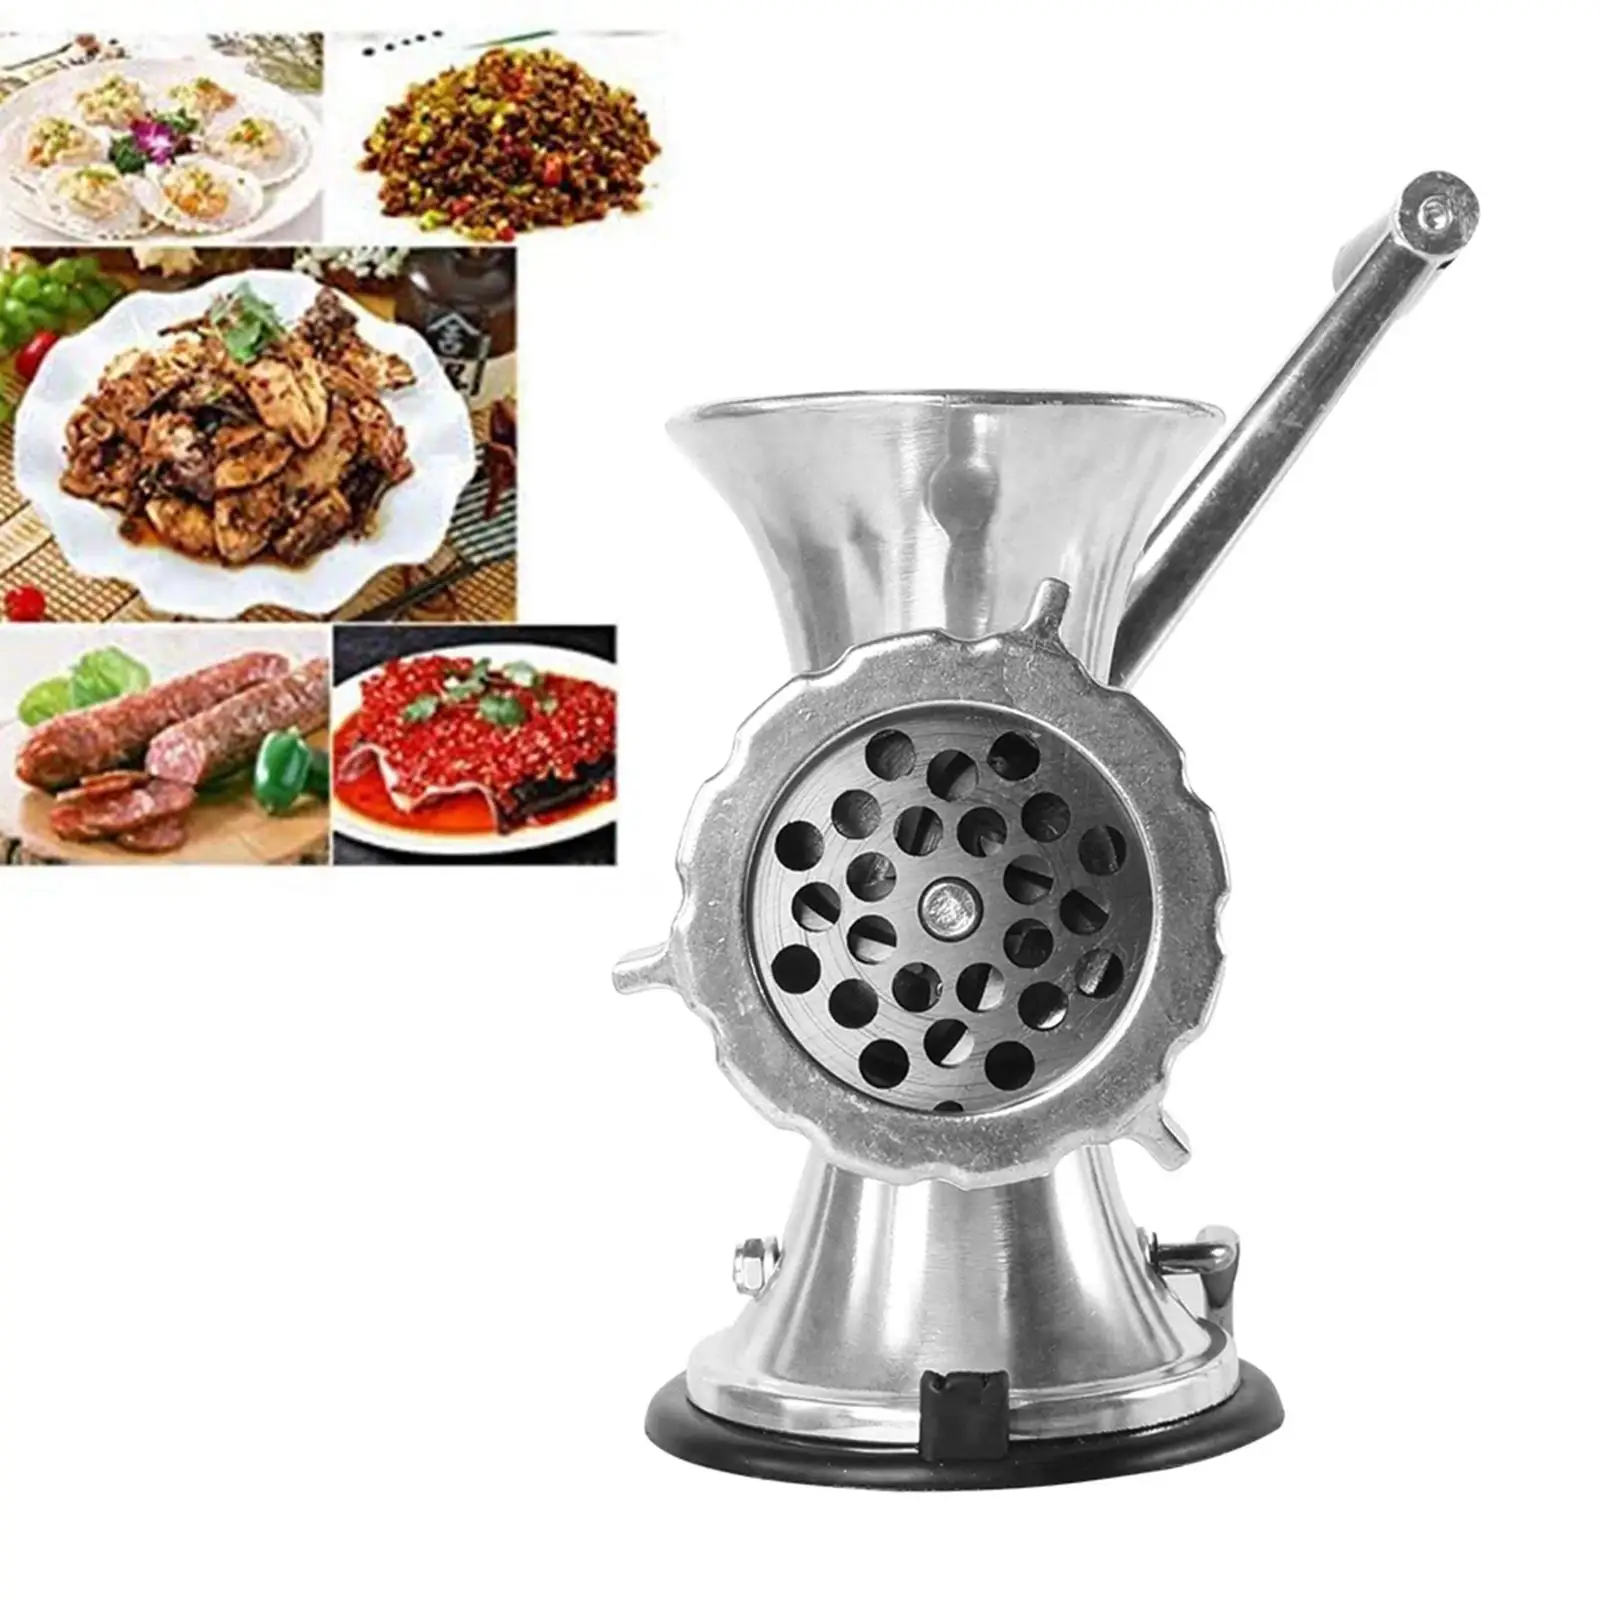 Handheld Manual Meat Grinder Household Kitchen Cooking Tool Sausage Filler Machine Meat Mincer for Beef Chicken Supplies